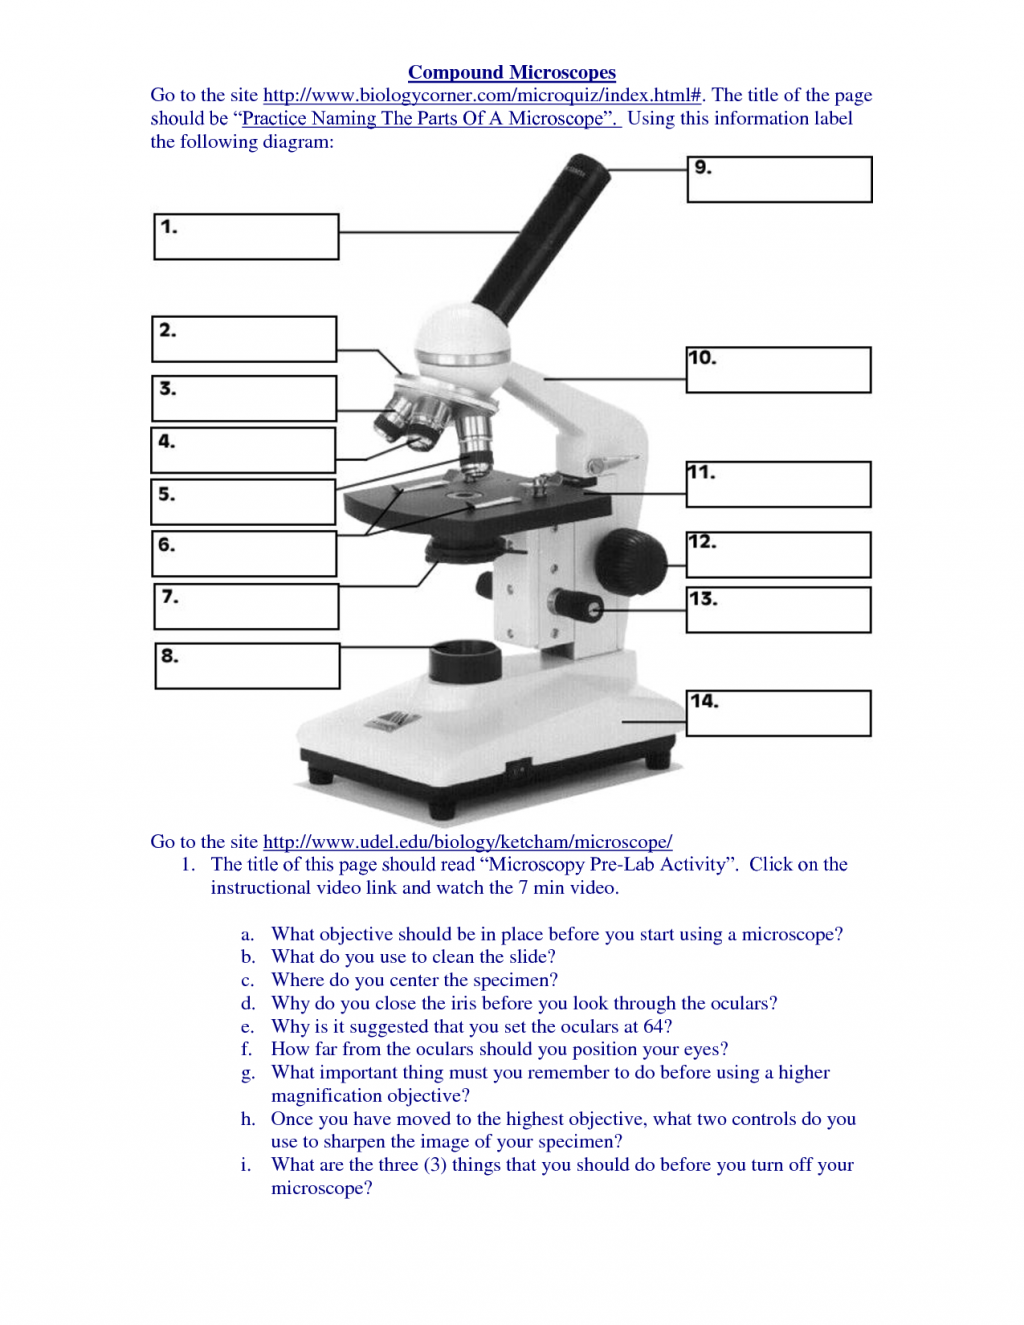 Pictures Compound Microscope Worksheet - Beatlesblogcarnival education, grade worksheets, learning, worksheets for teachers, and math worksheets Compound Microscope Parts And Functions Worksheet 1325 x 1024